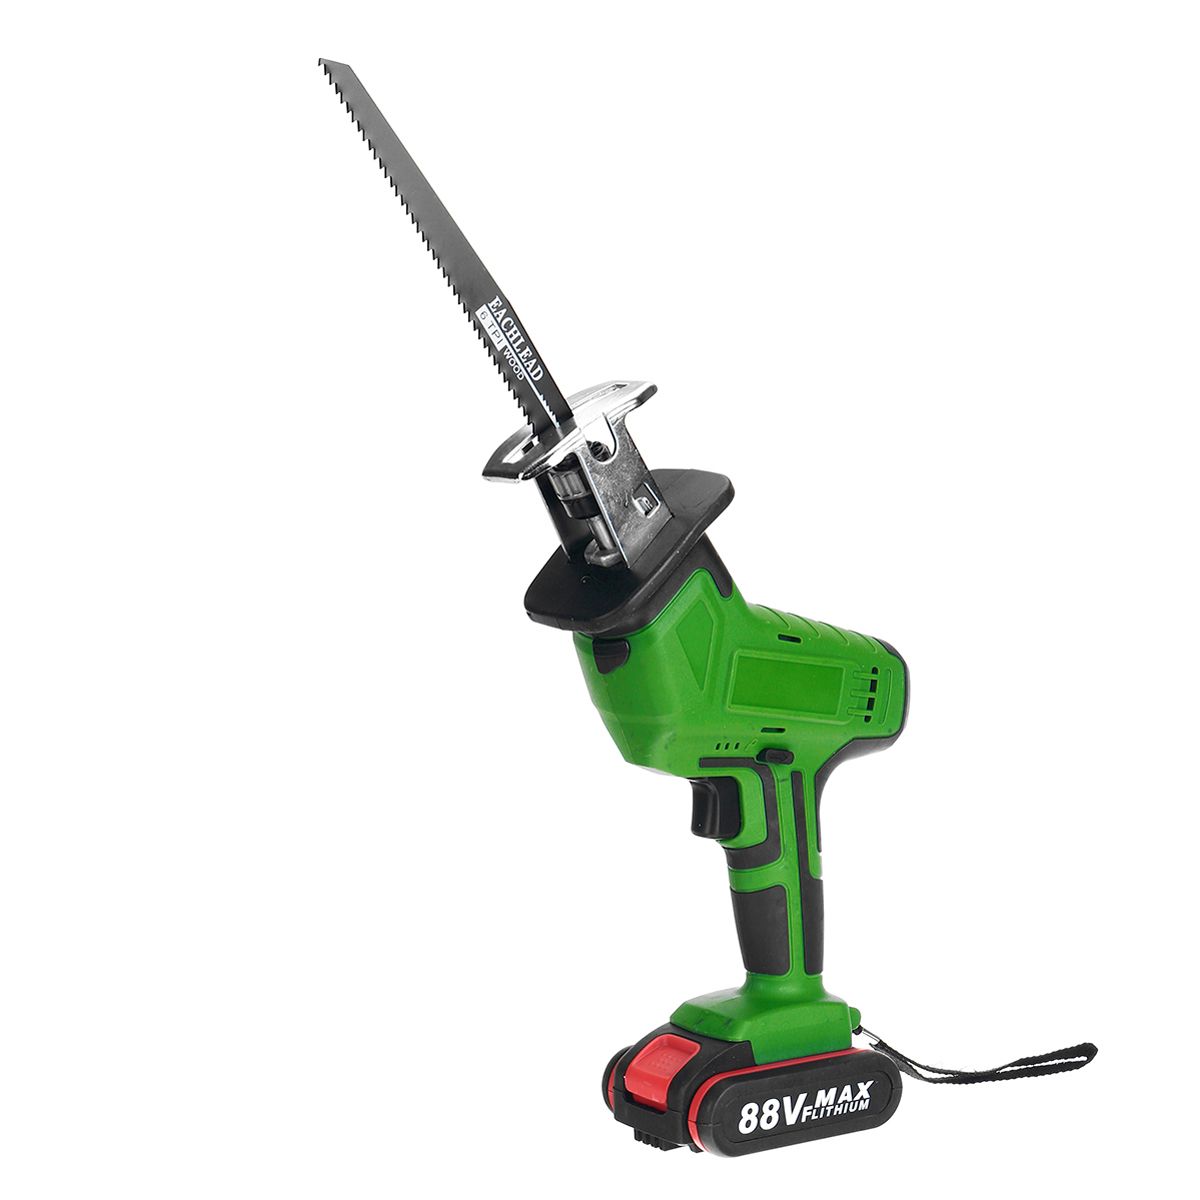 88VF-Electric-Reciprocating-Saw-Wireless-Rechargeable-Saw-Wood-Metal-Plastic-Sawing-Cutting-Tool-1765151